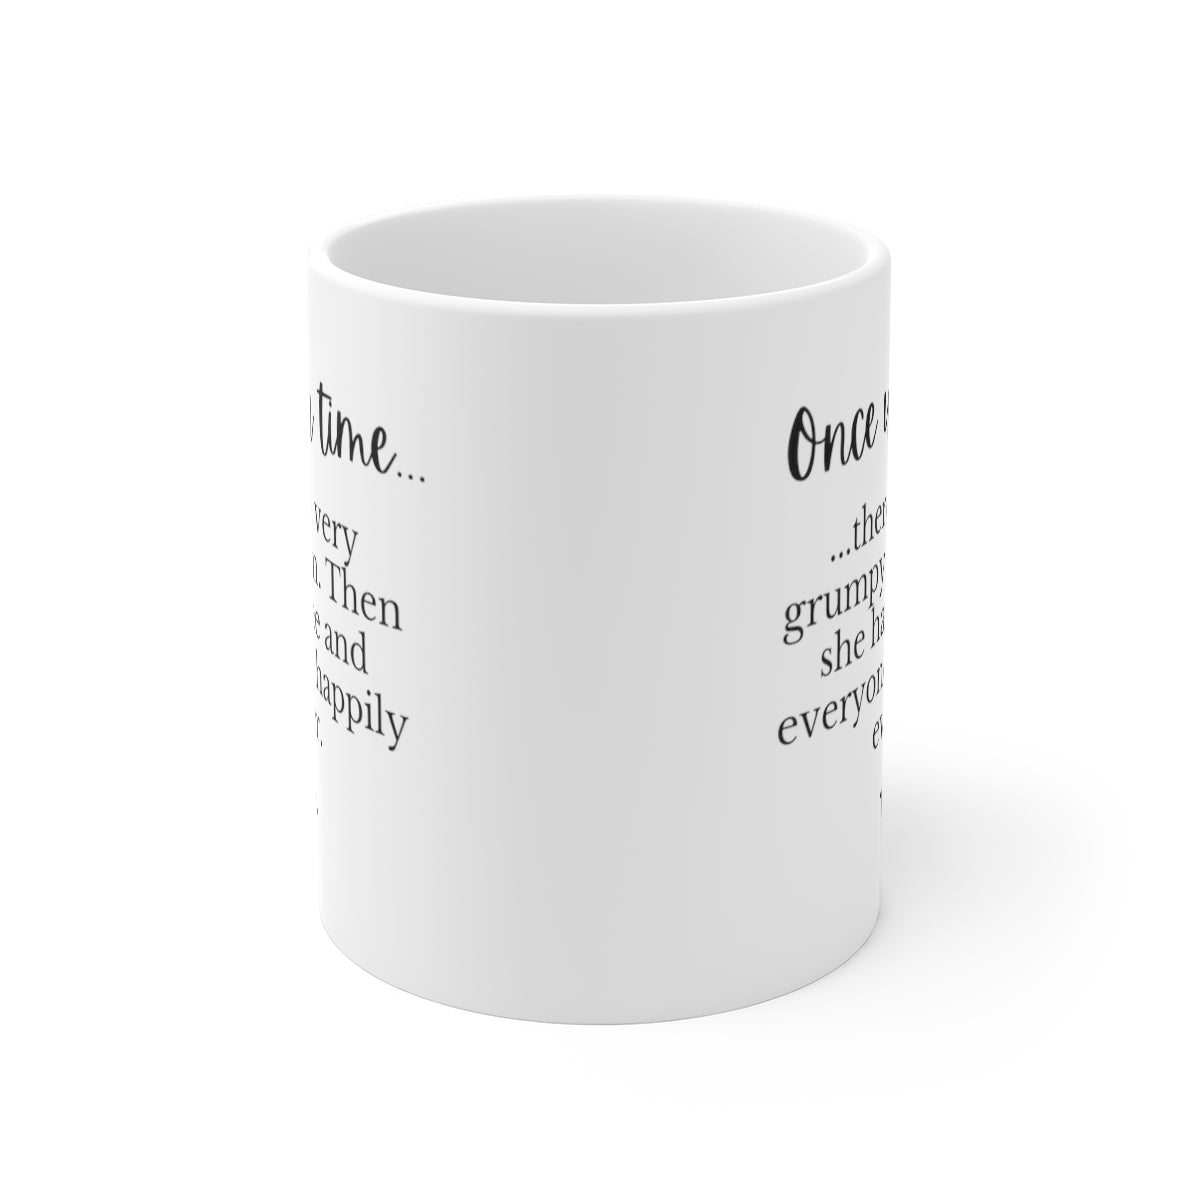 Once Upon A Time There Was A Very Grumpy Woman. Then She Had Coffee... | Funny Mug for Coffee Lovers | Mug 11oz